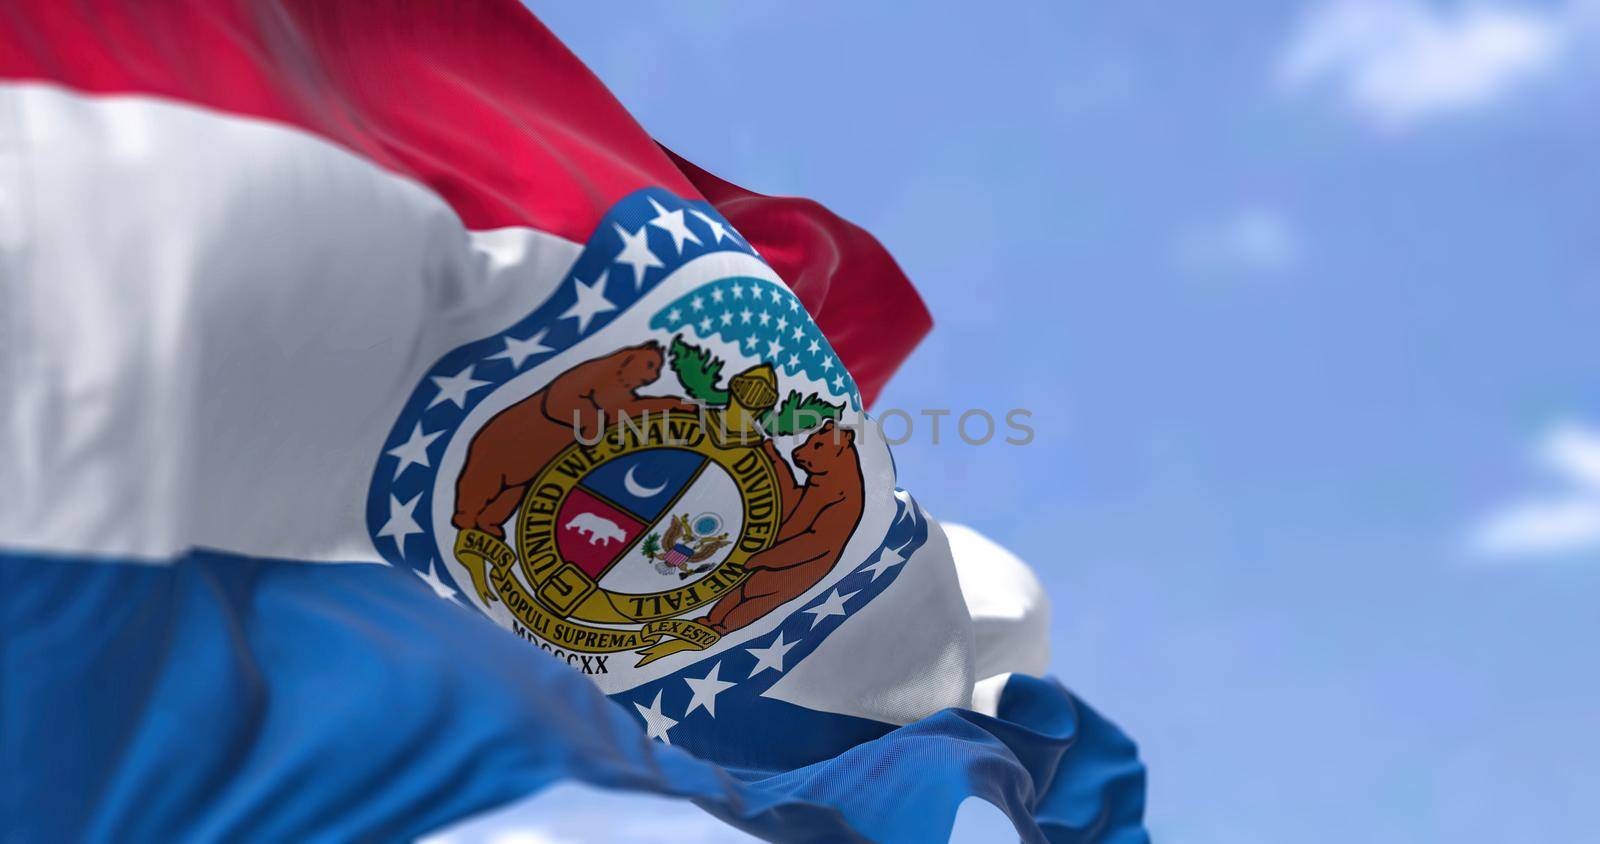 The US state flag of Missouri waving in the wind by rarrarorro